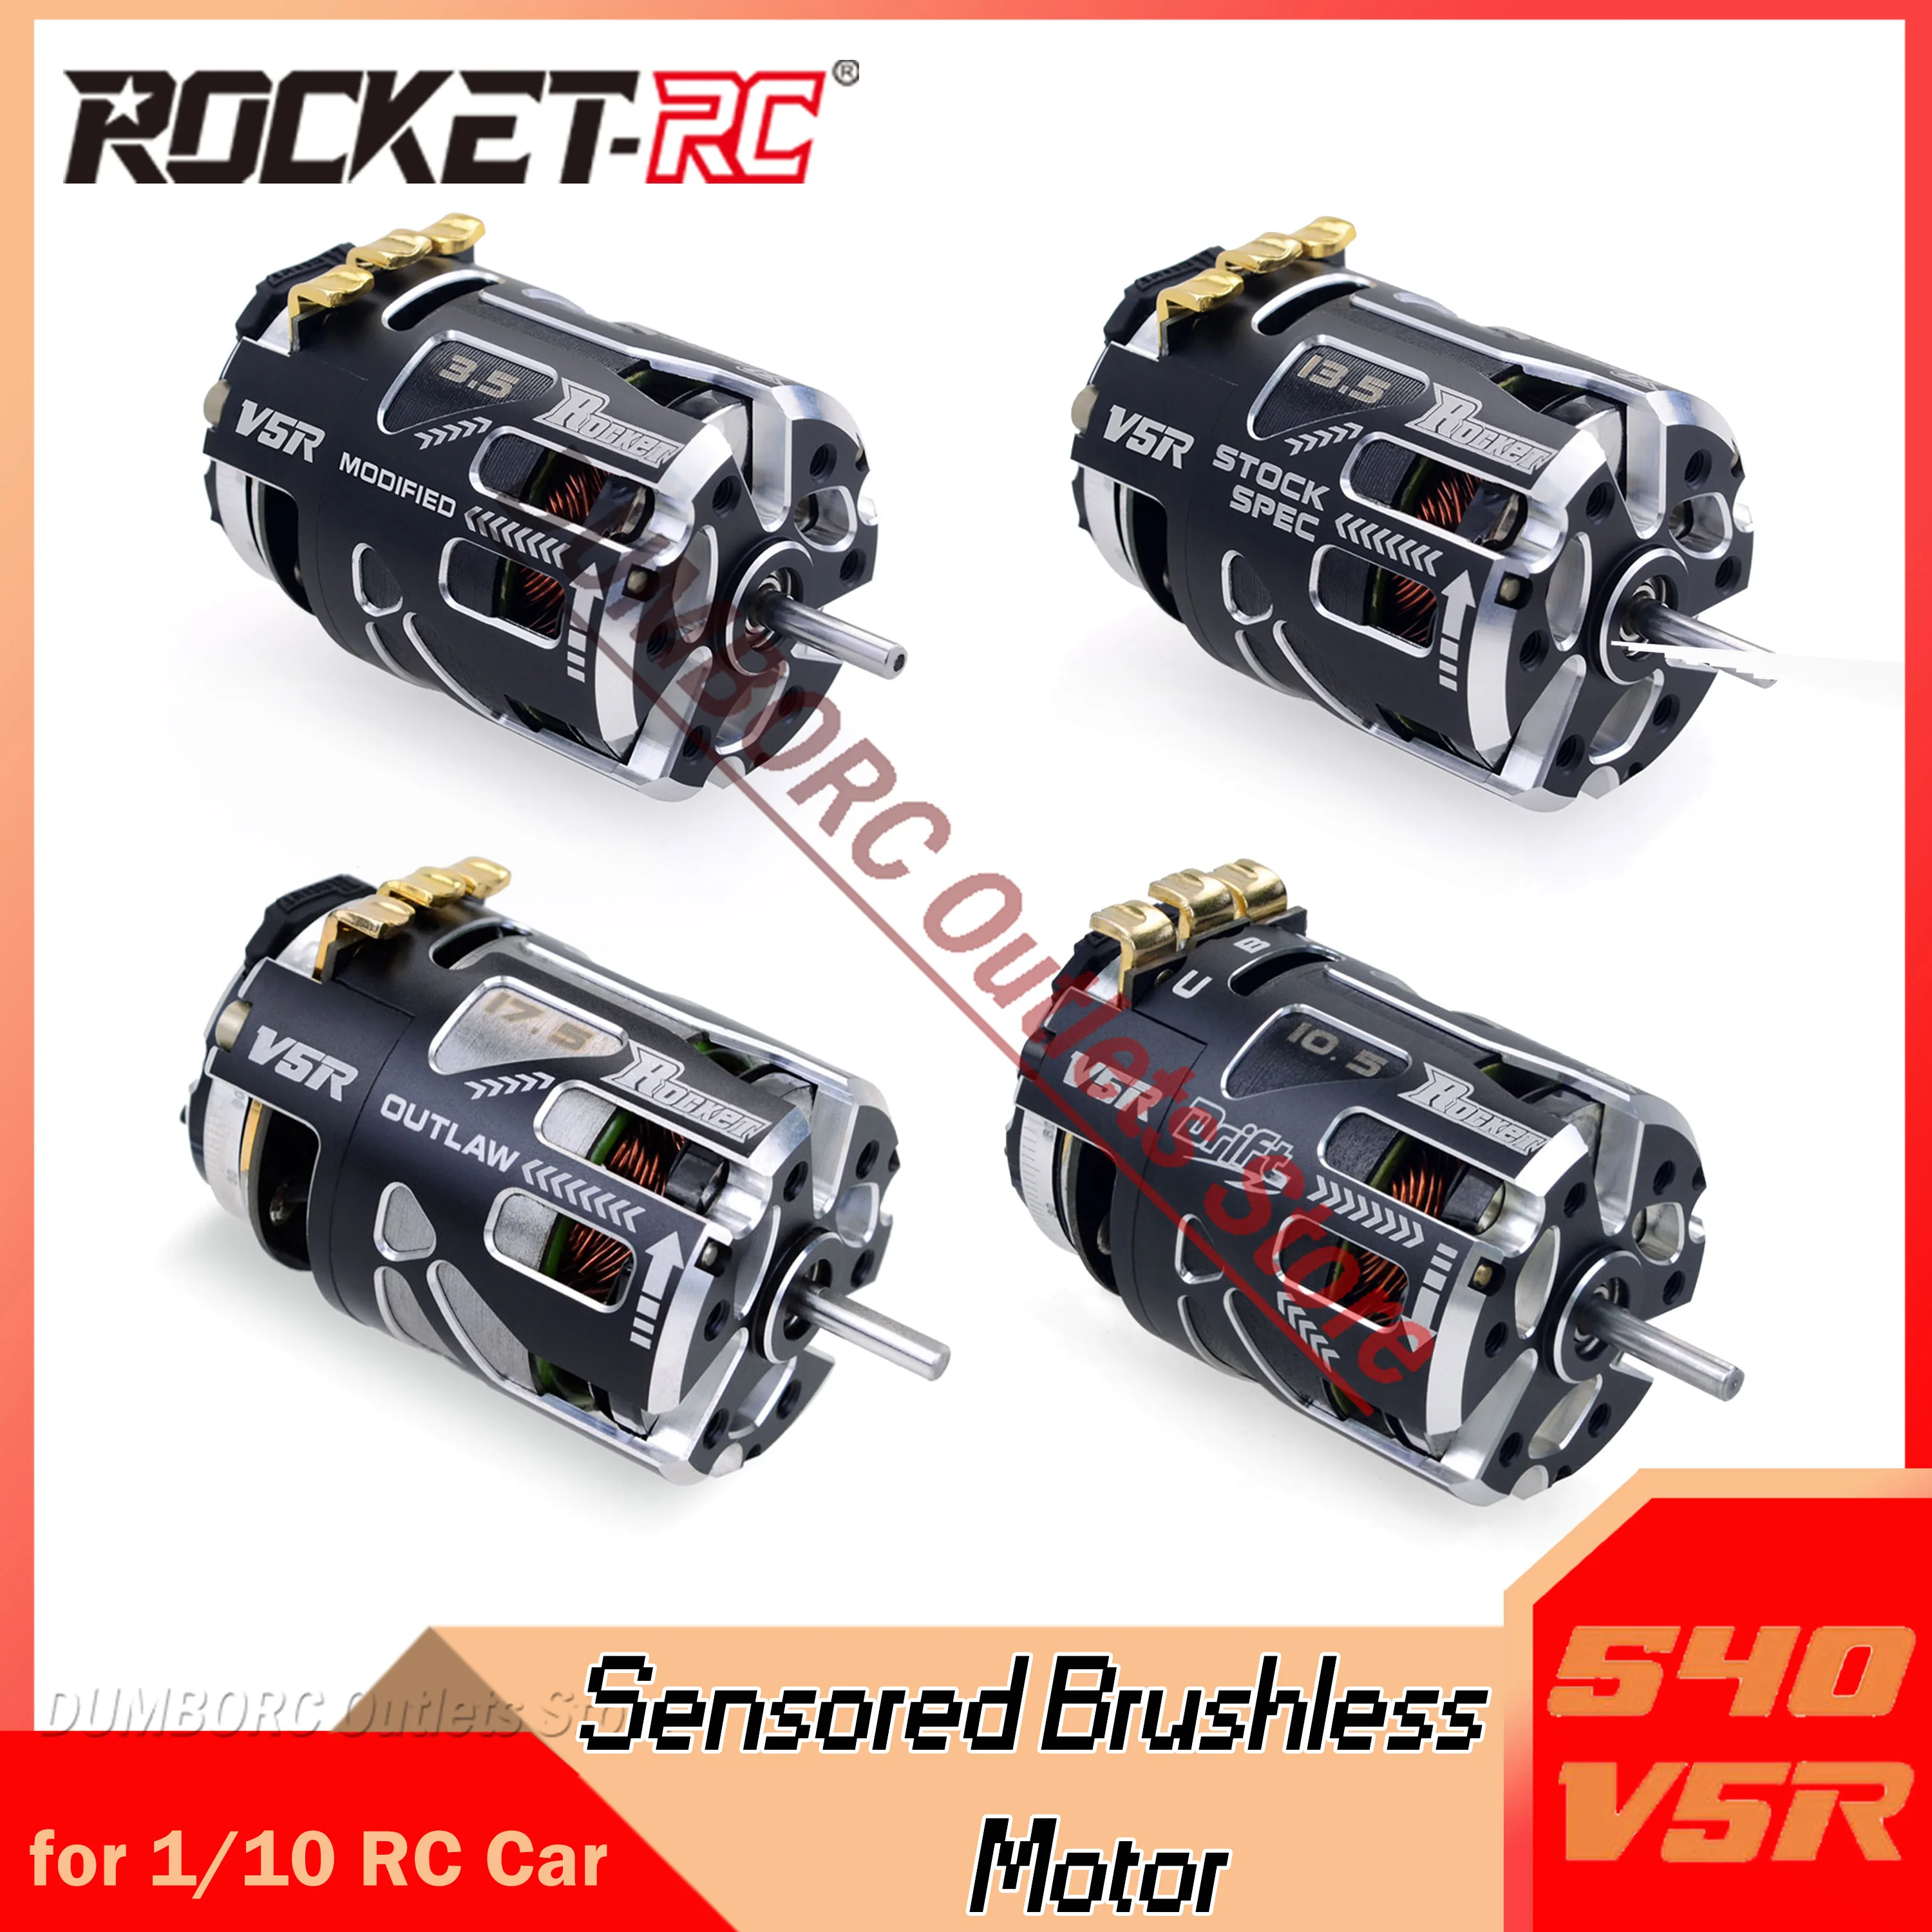 

Rocket 540 V5R Sensored Brushless Motor for 1/10 1/12 RC Off-road Electric Races Car Drift Racing Competition F1 Tamiya Redcat